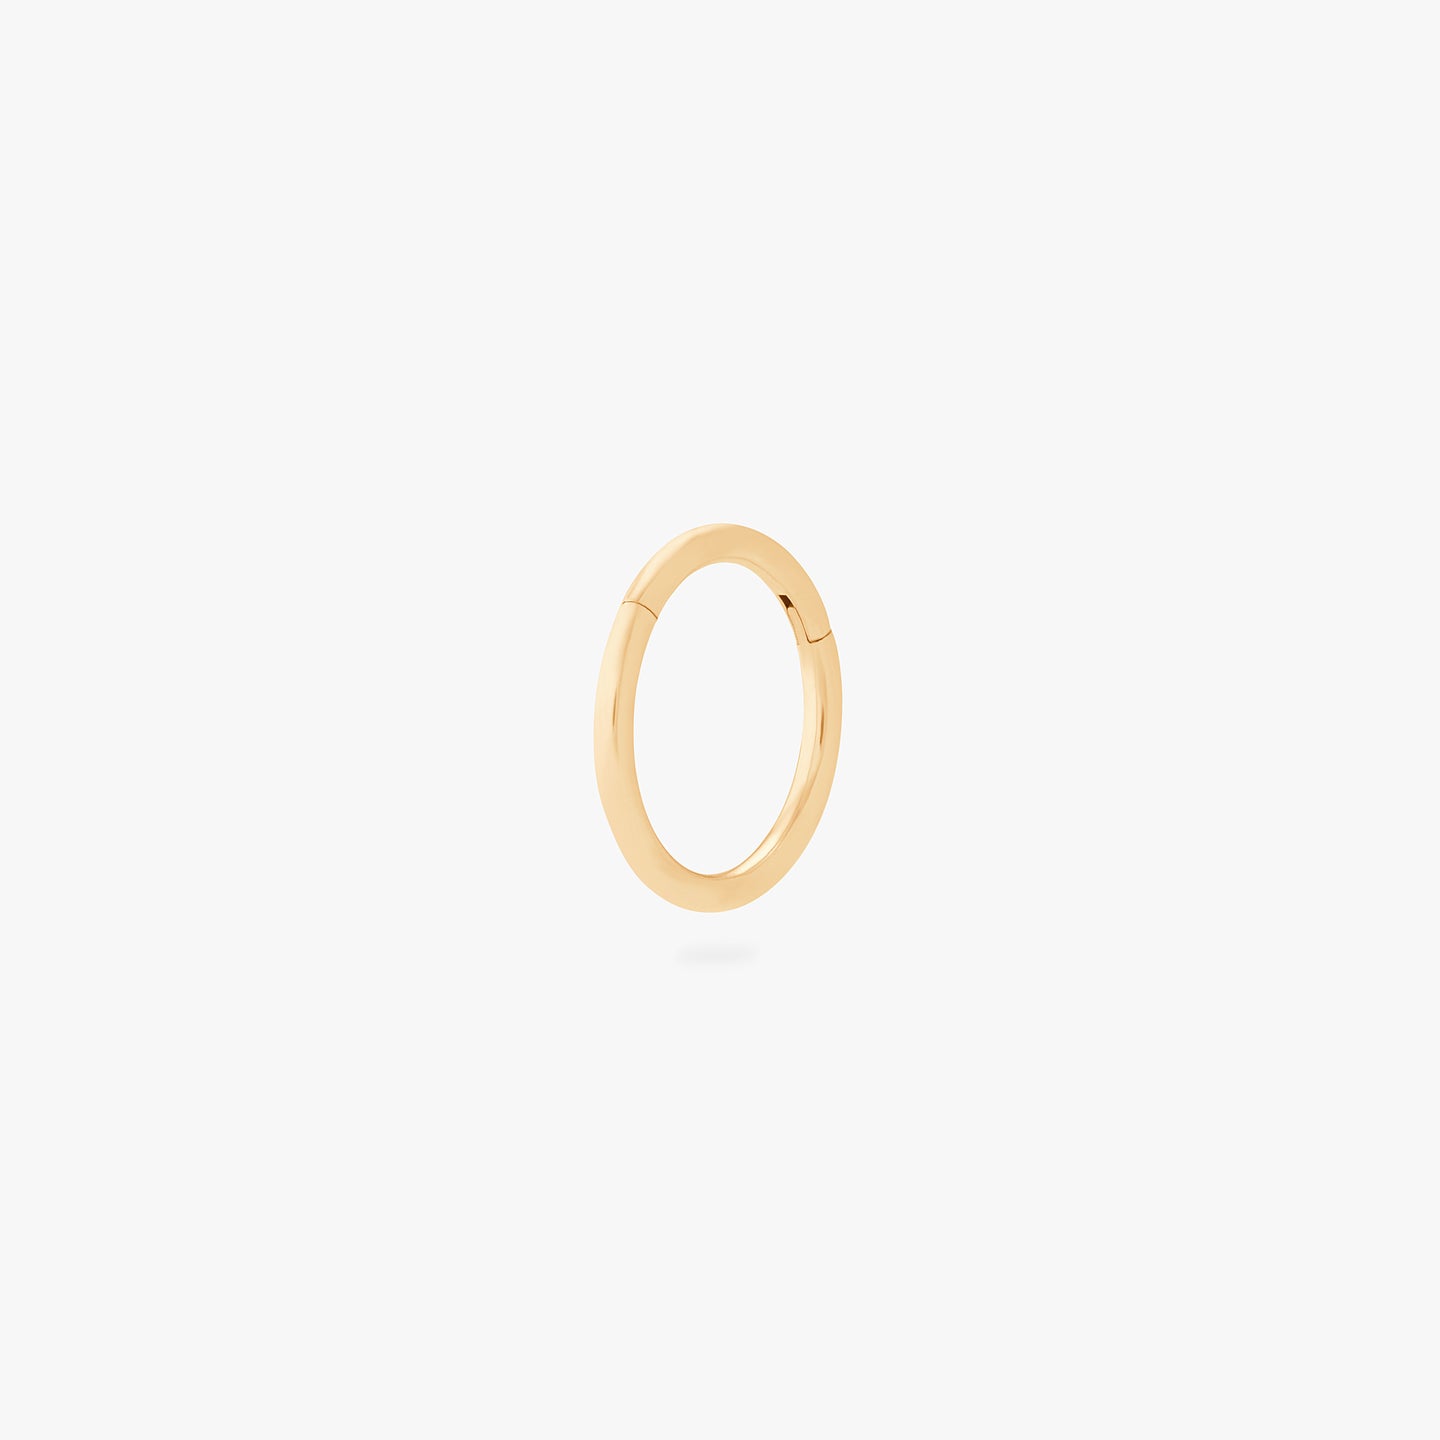 This is an image of a gold clicker with an 8mm inner diameter. color:null|gold